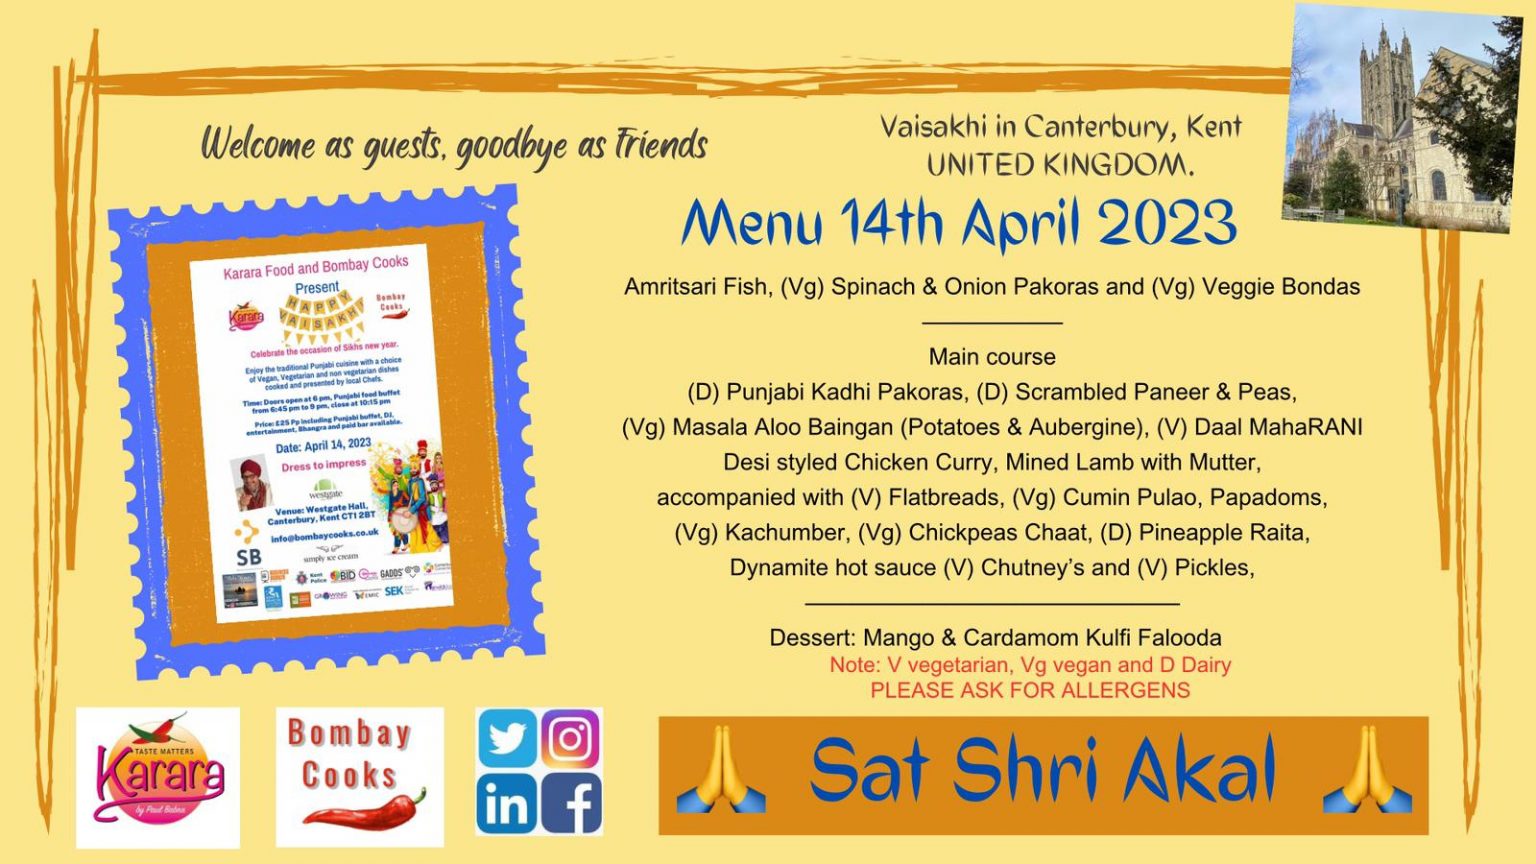 Celebrating the Sikh New Year, 14th April 2023 Ethnic Minorities in